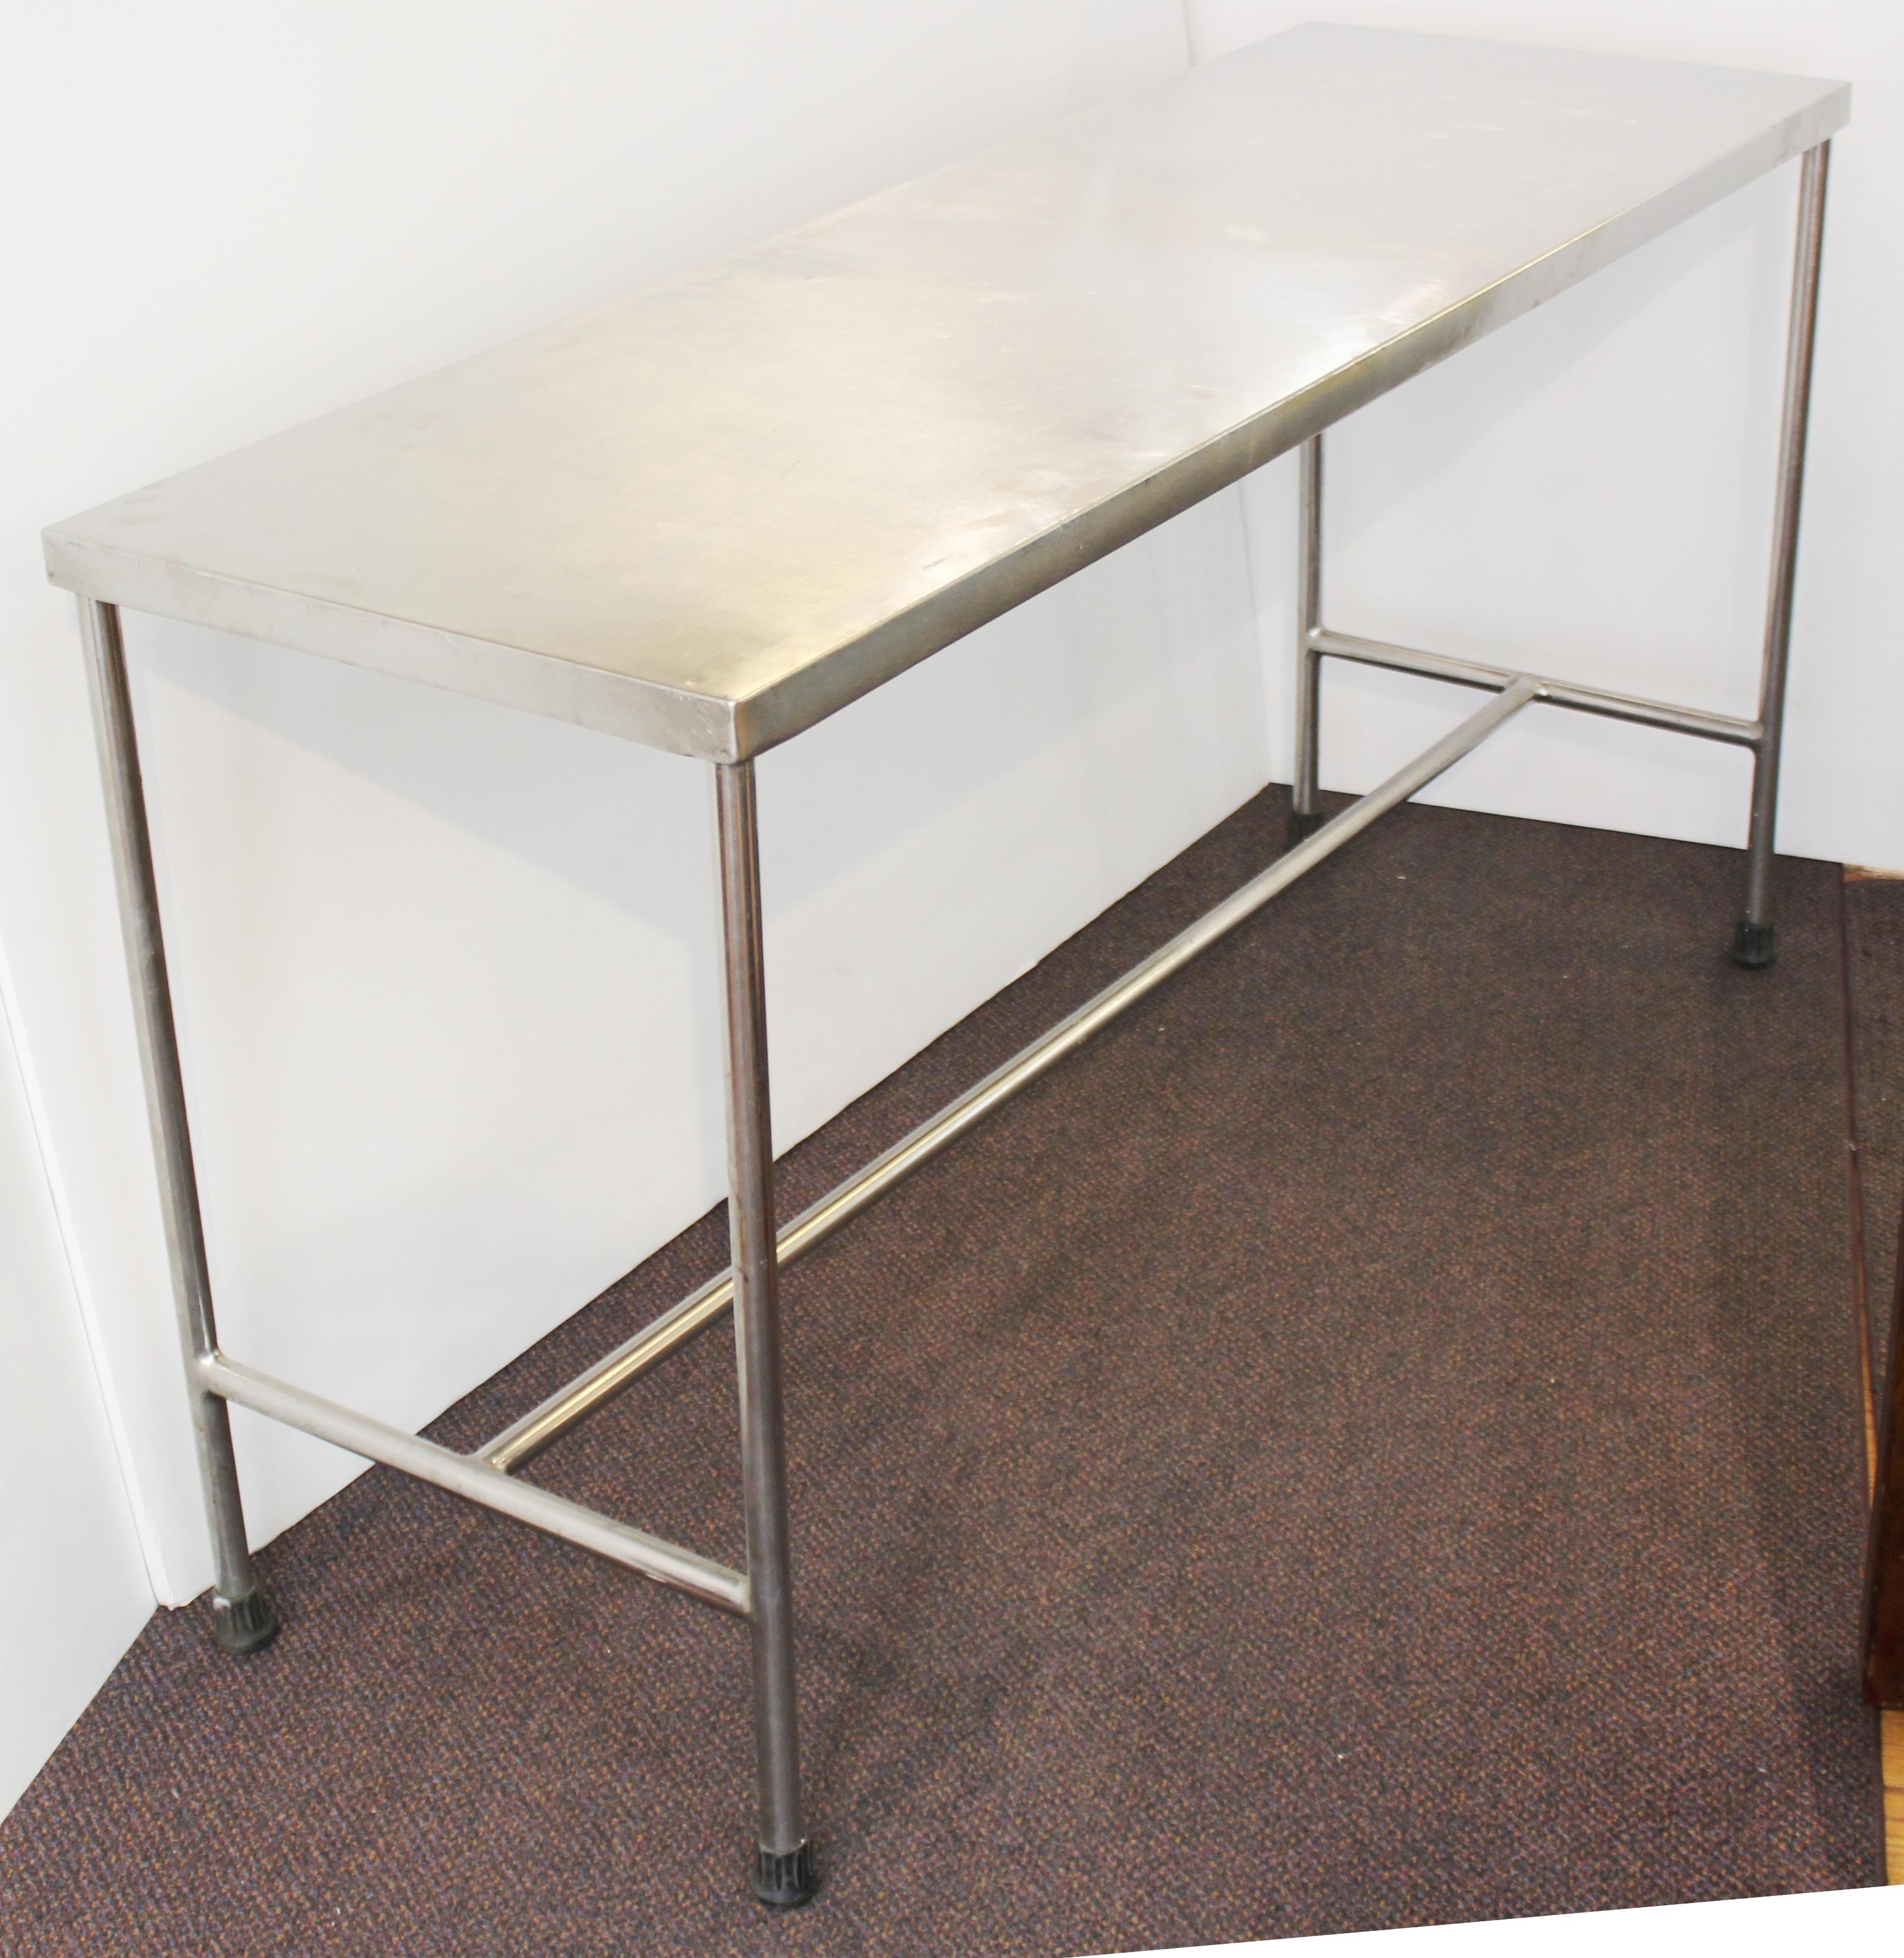 American Industrial Modern Style Stainless Steel H-Base Table